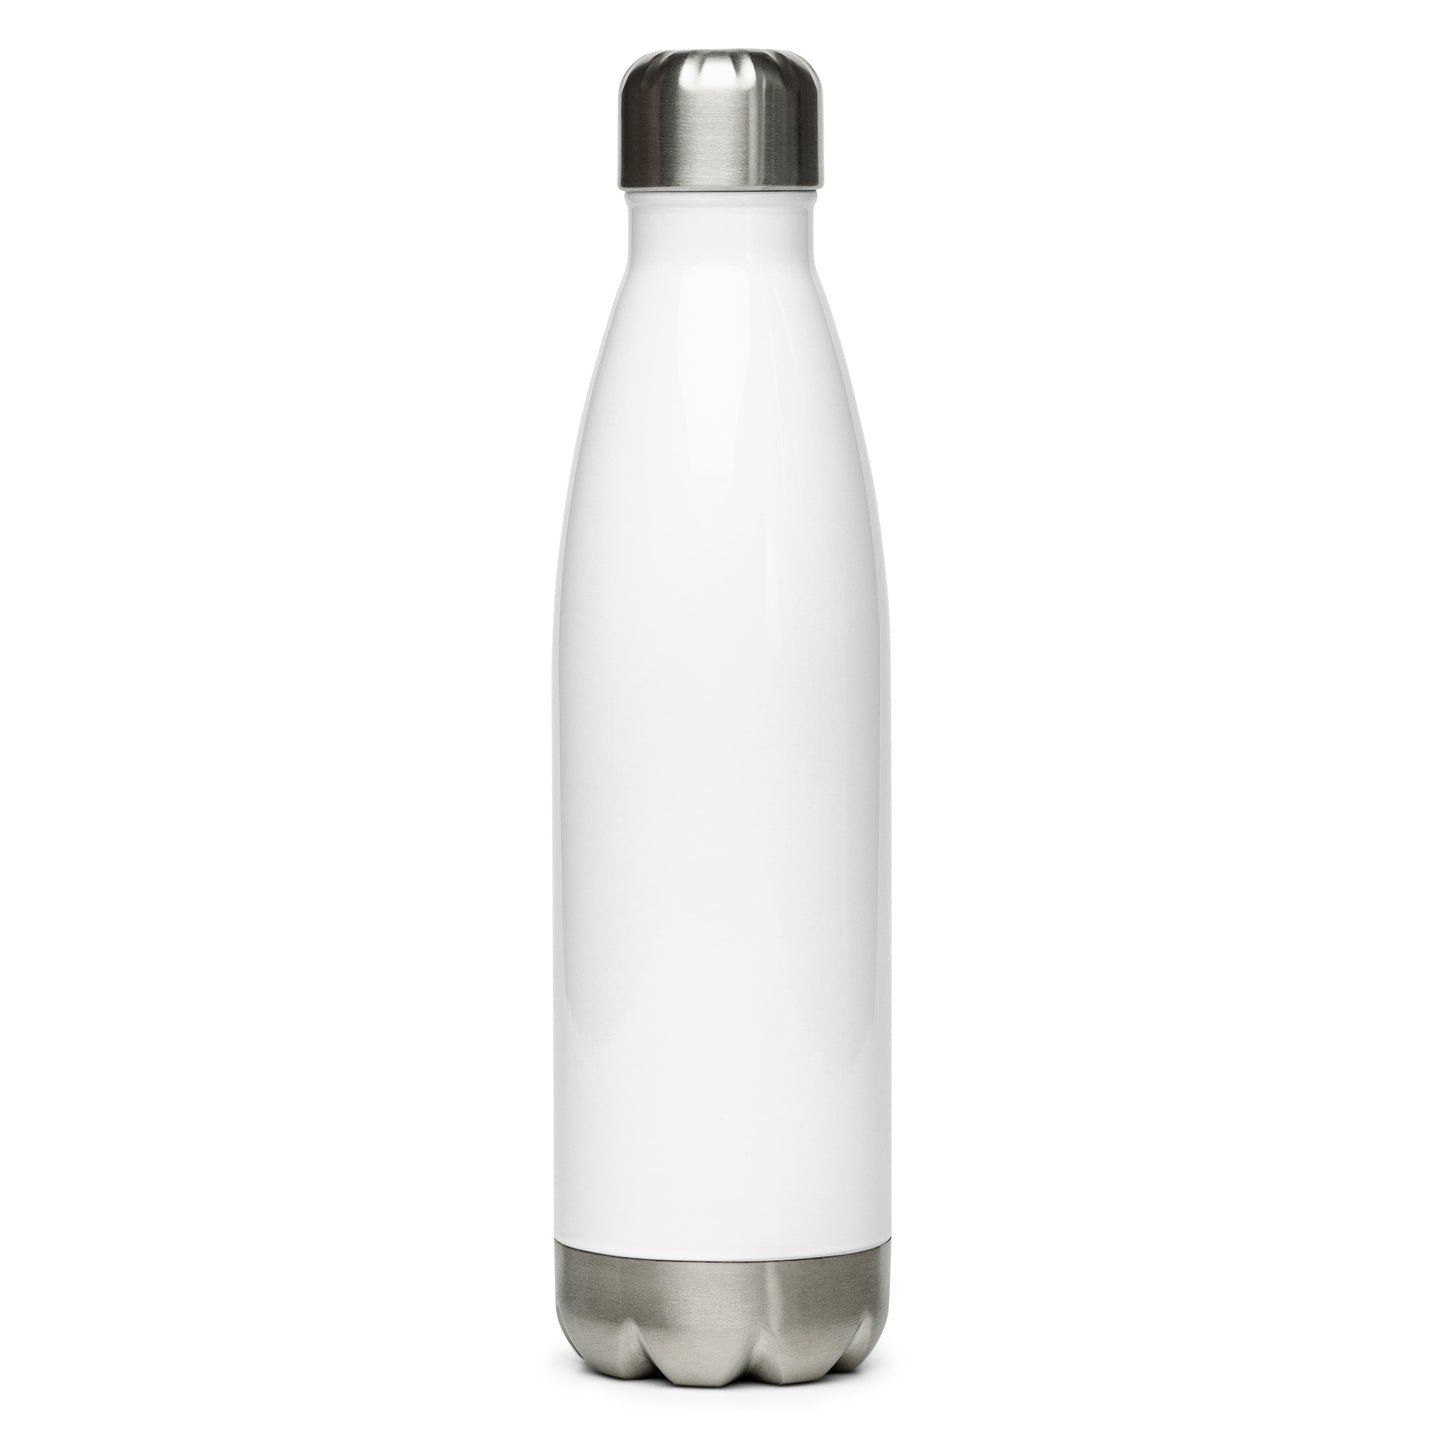 Snooker "Pool for Grown Ups" - White stainless steel water bottle